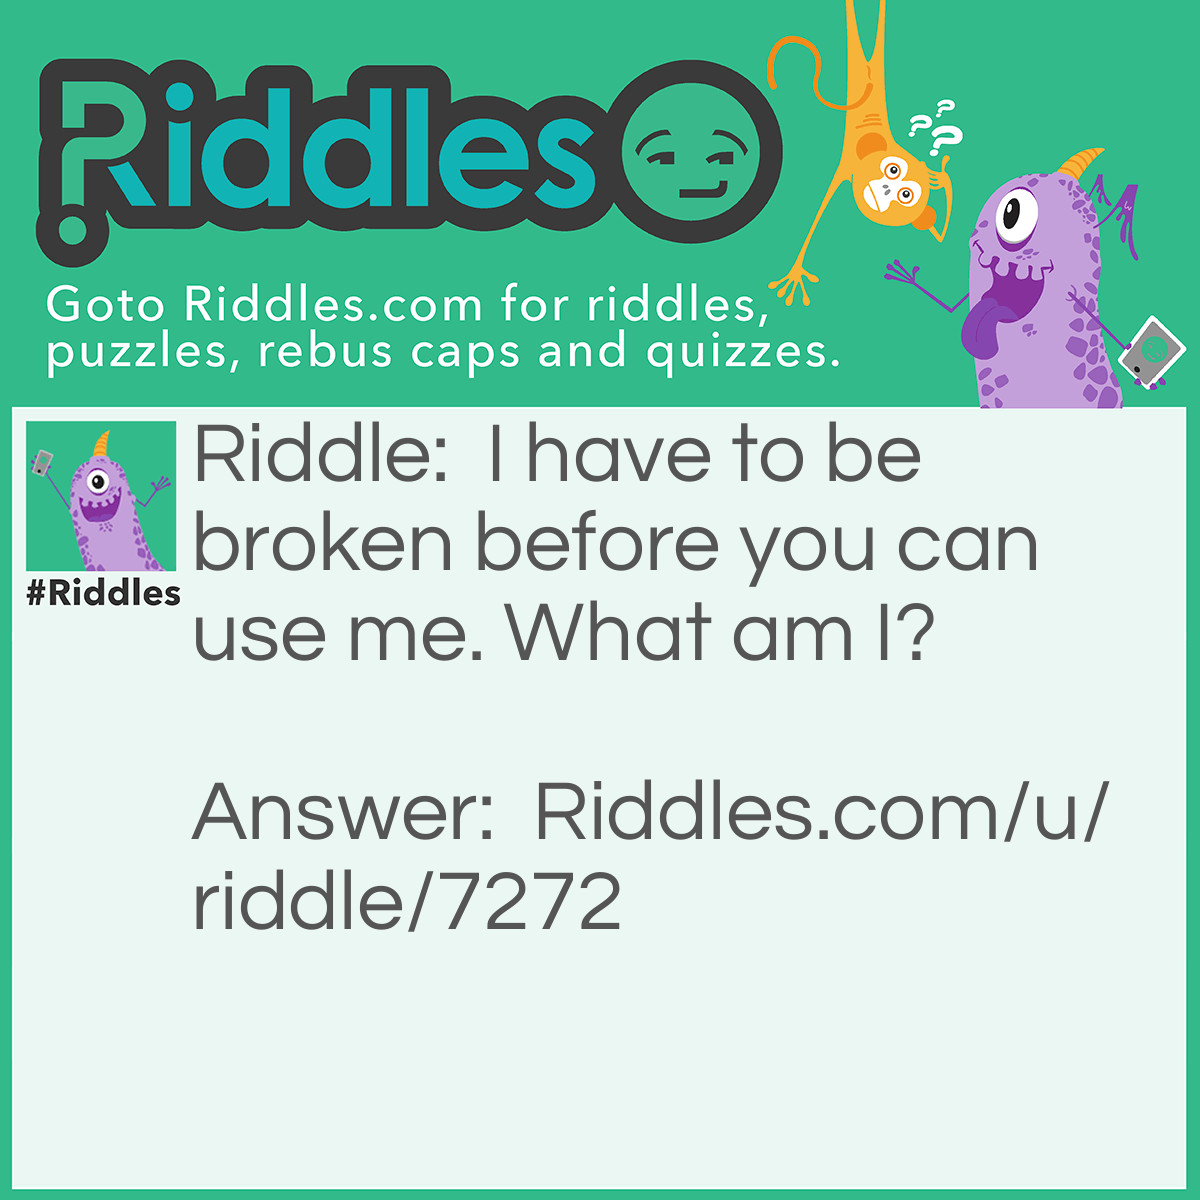 Riddle: I have to be broken before you can use me. What am I? Answer: Egg